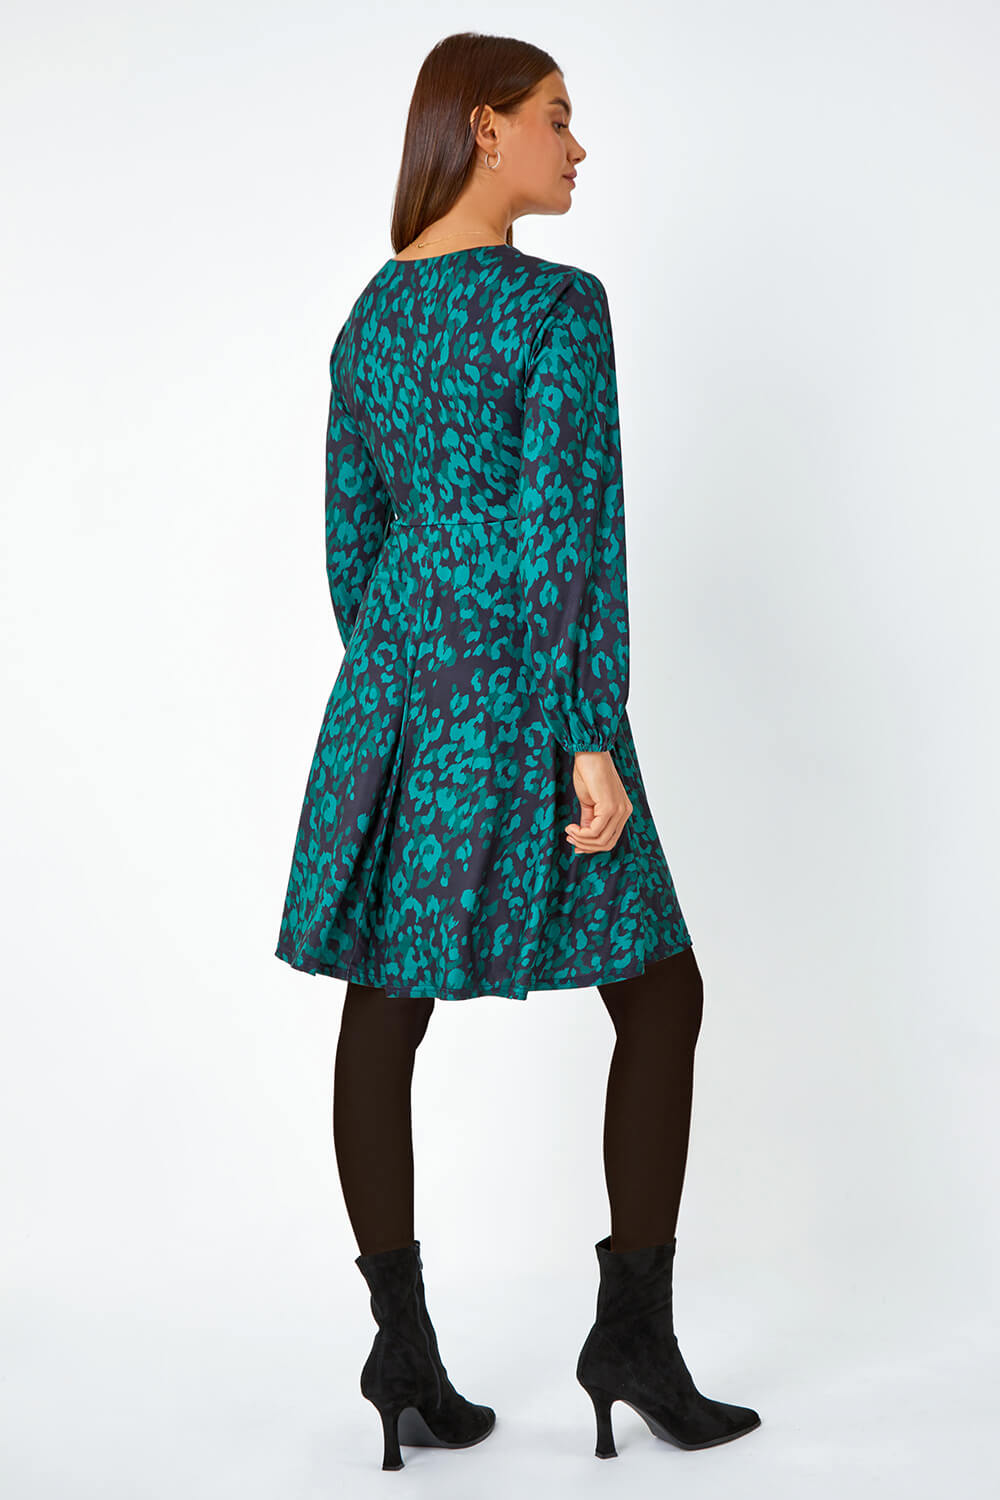 Green Leopard Print Gathered Stretch Dress, Image 4 of 5